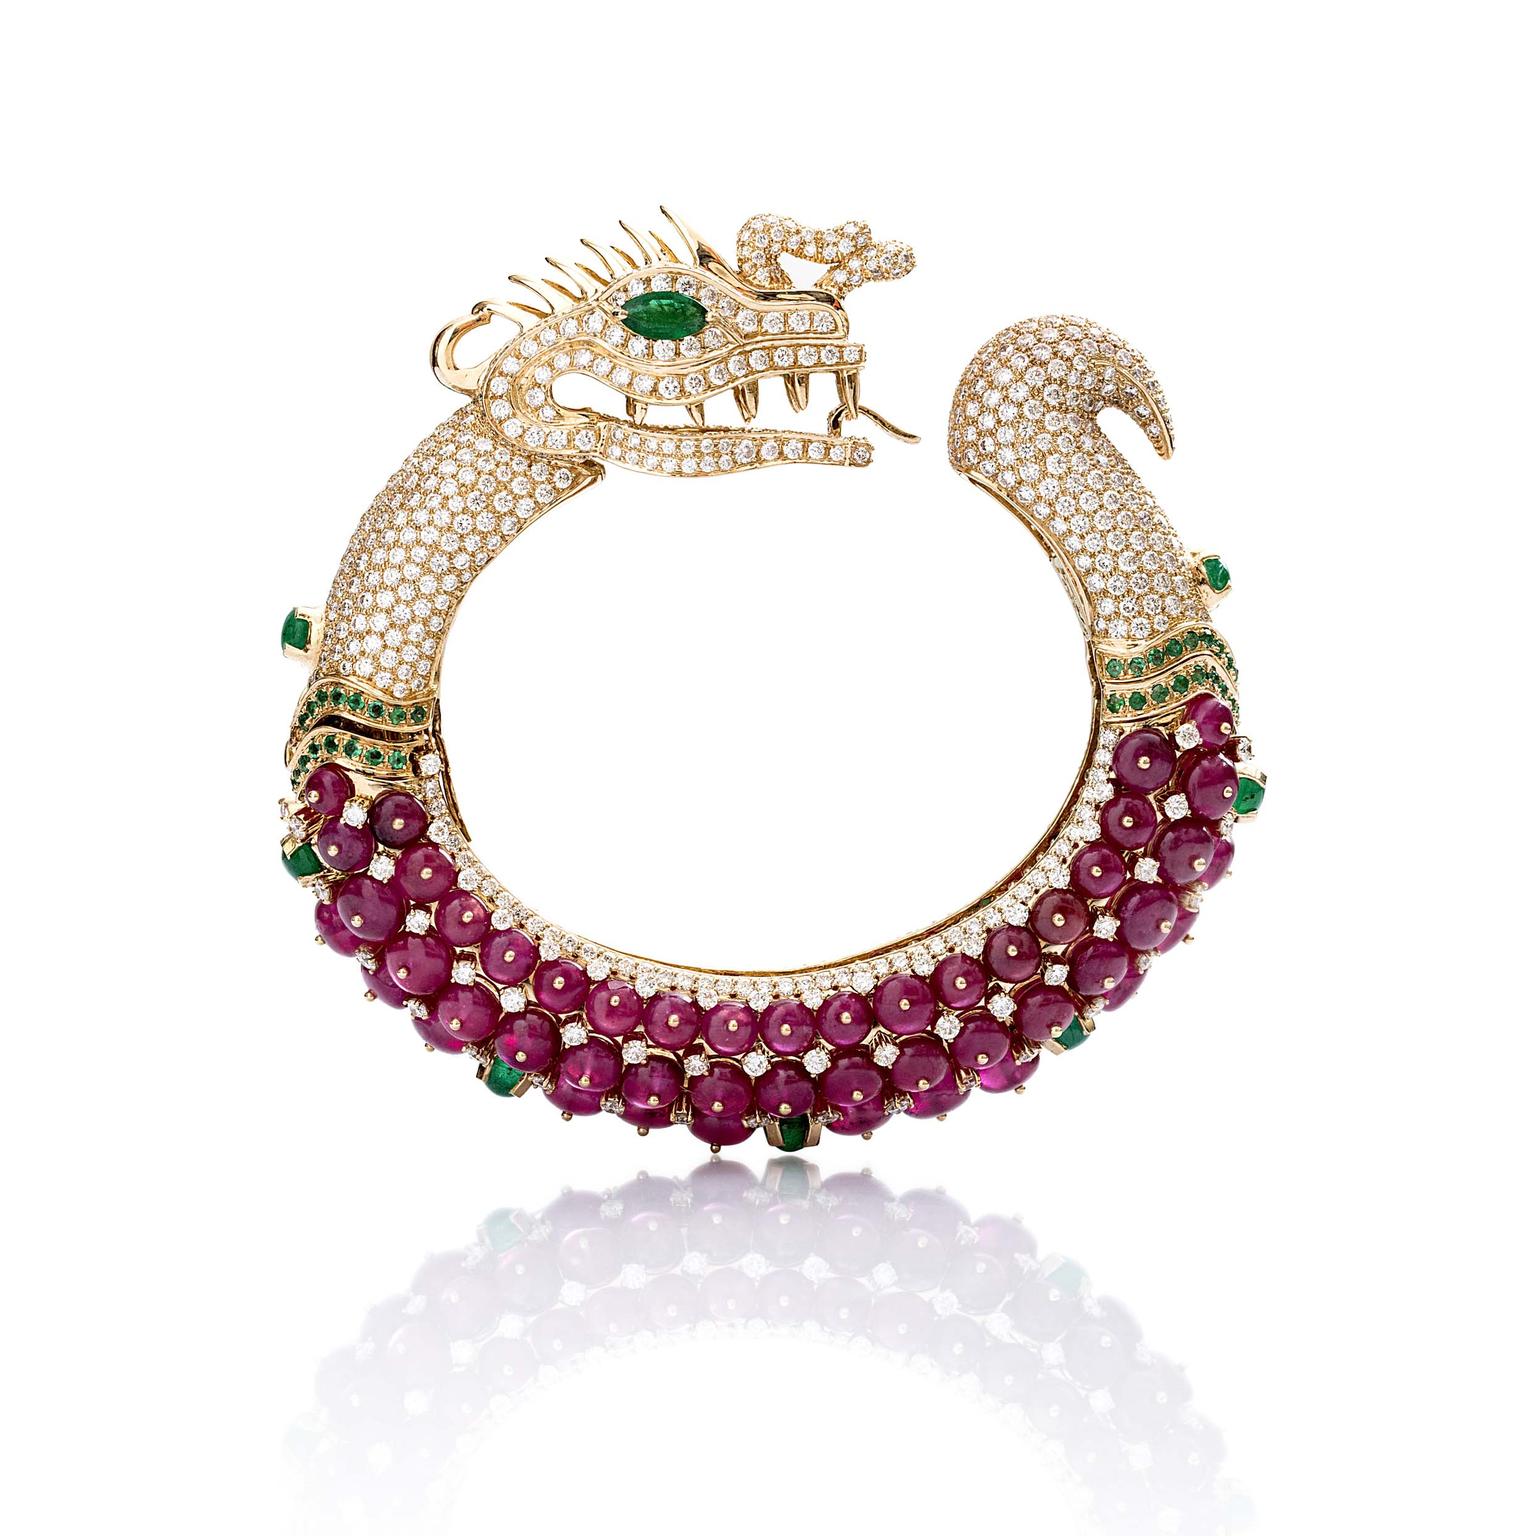 Fahra Khan_Le Jardin Exotique_A magnificent ruby Farah Khan hand cuff shaped like a dragon in 18ct yellow gold with emeralds and diamonds.jpg